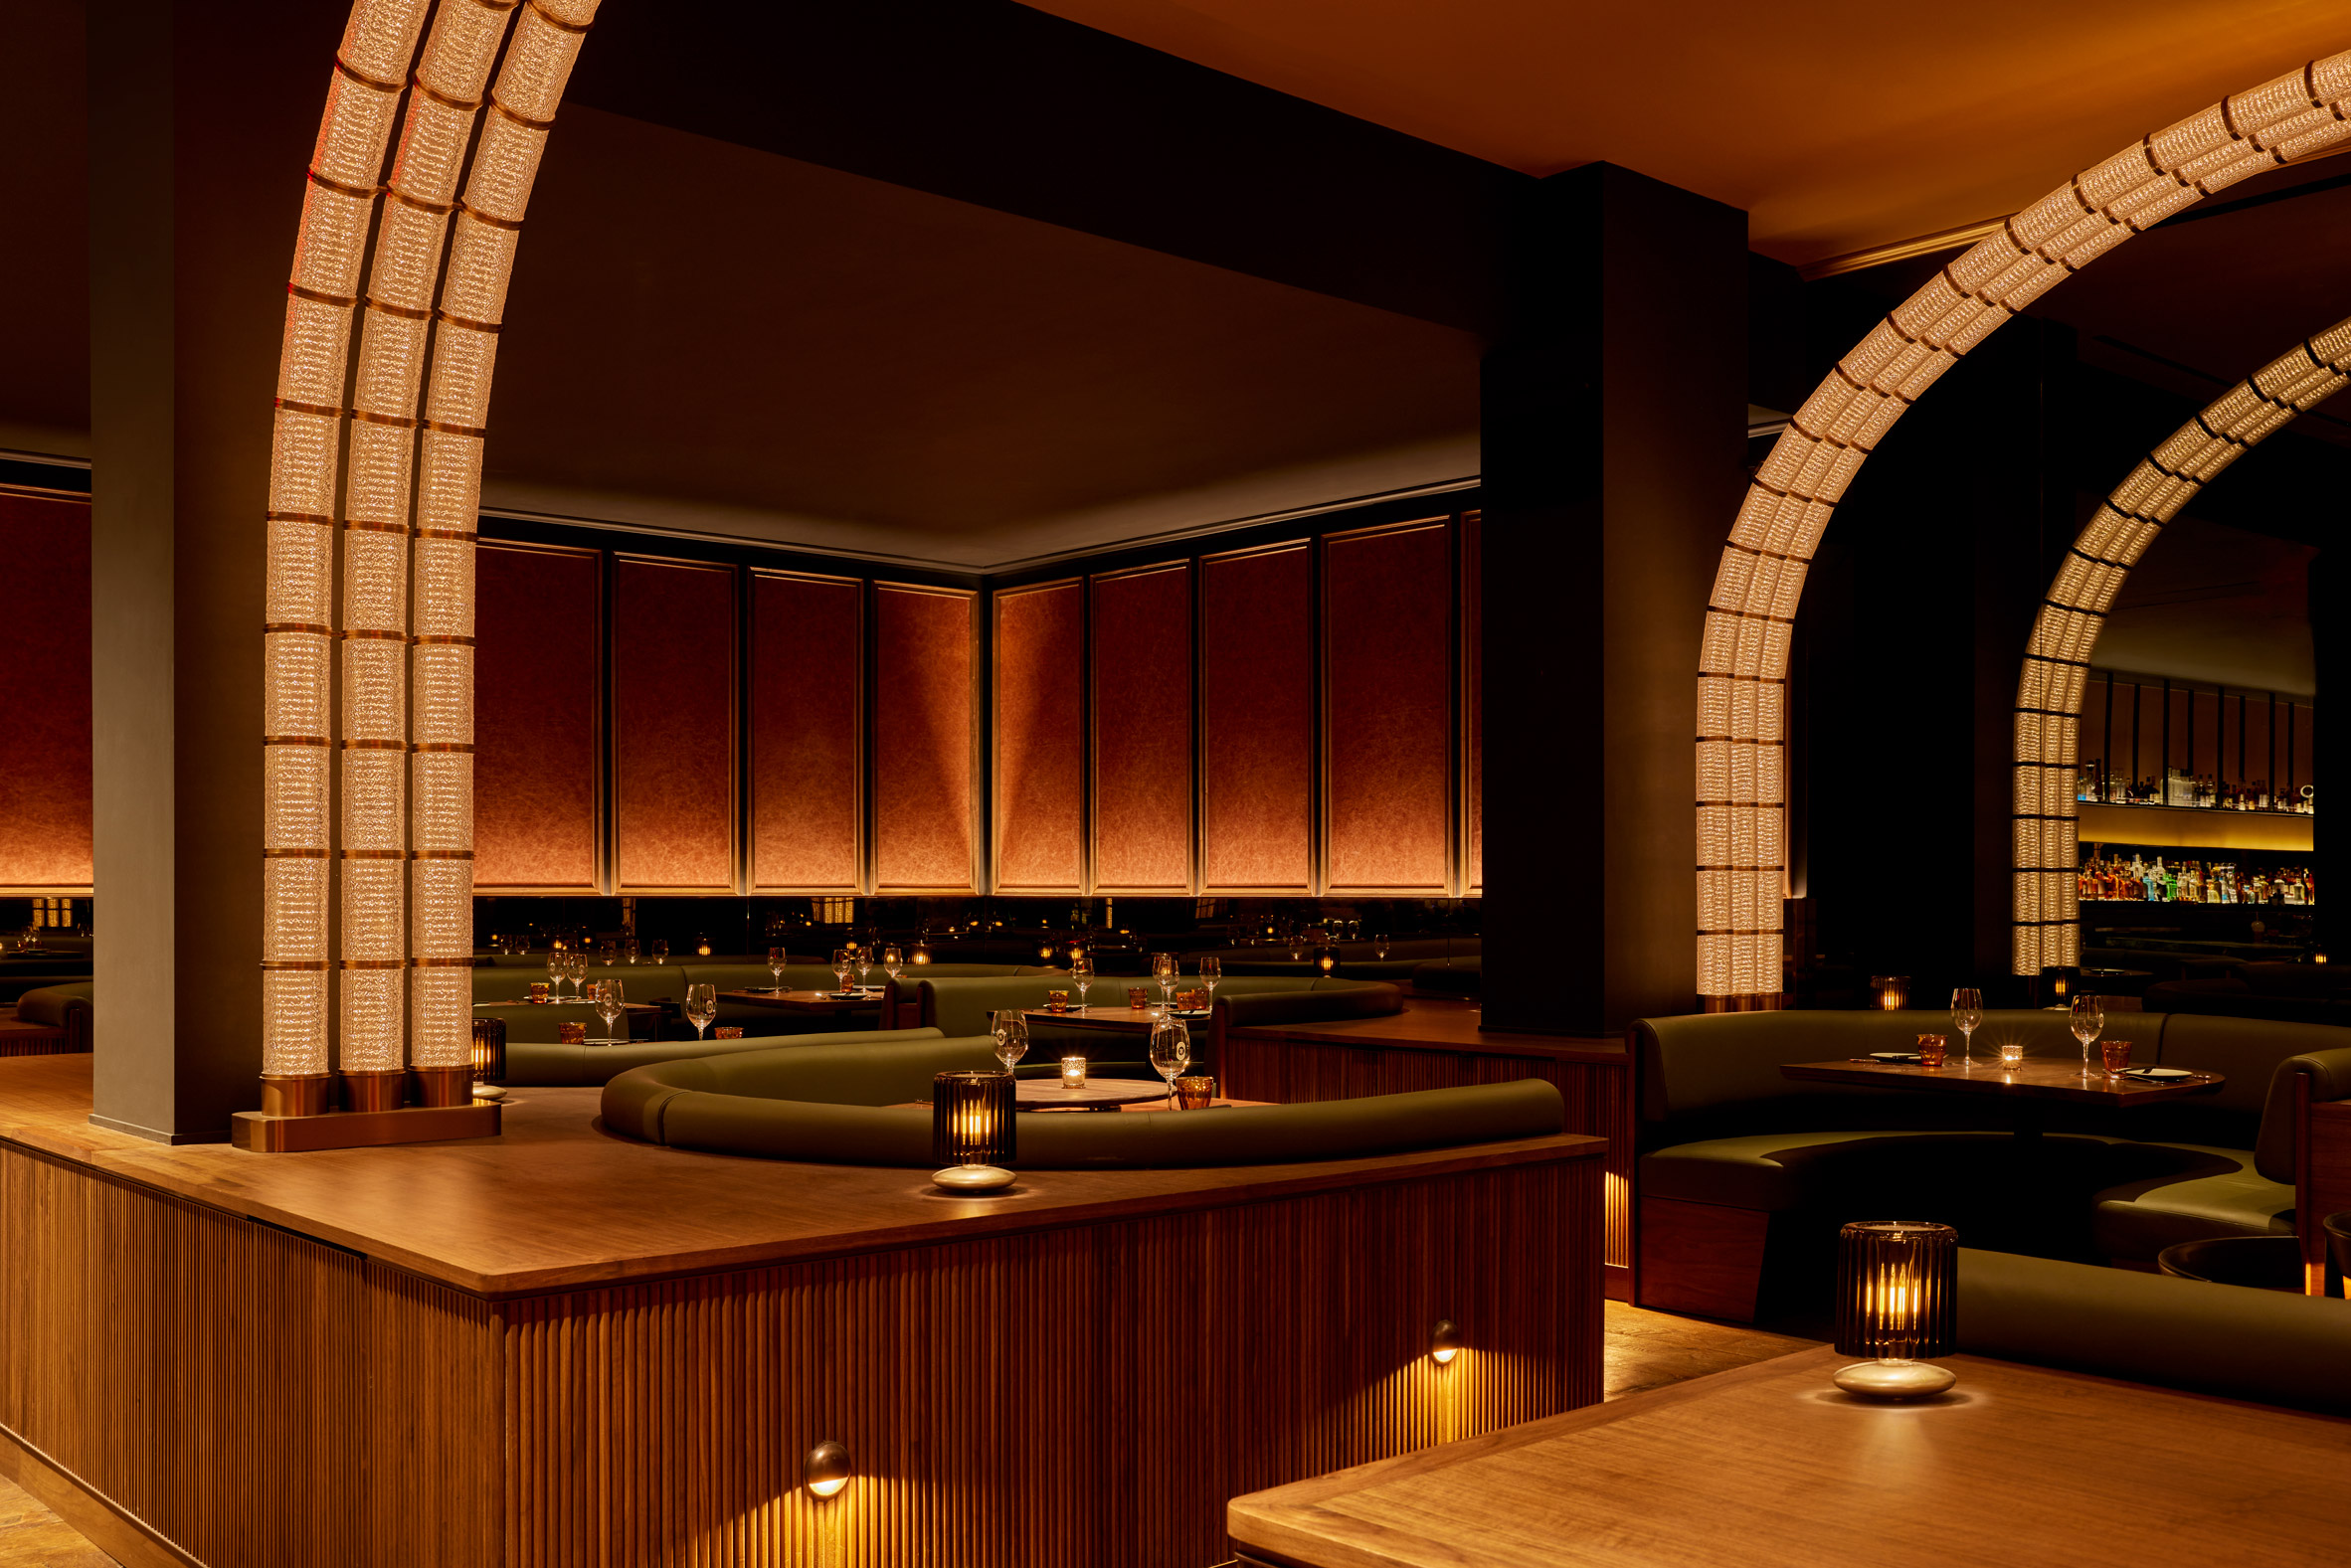 Restaurant interior with moody material palette and warm lighting